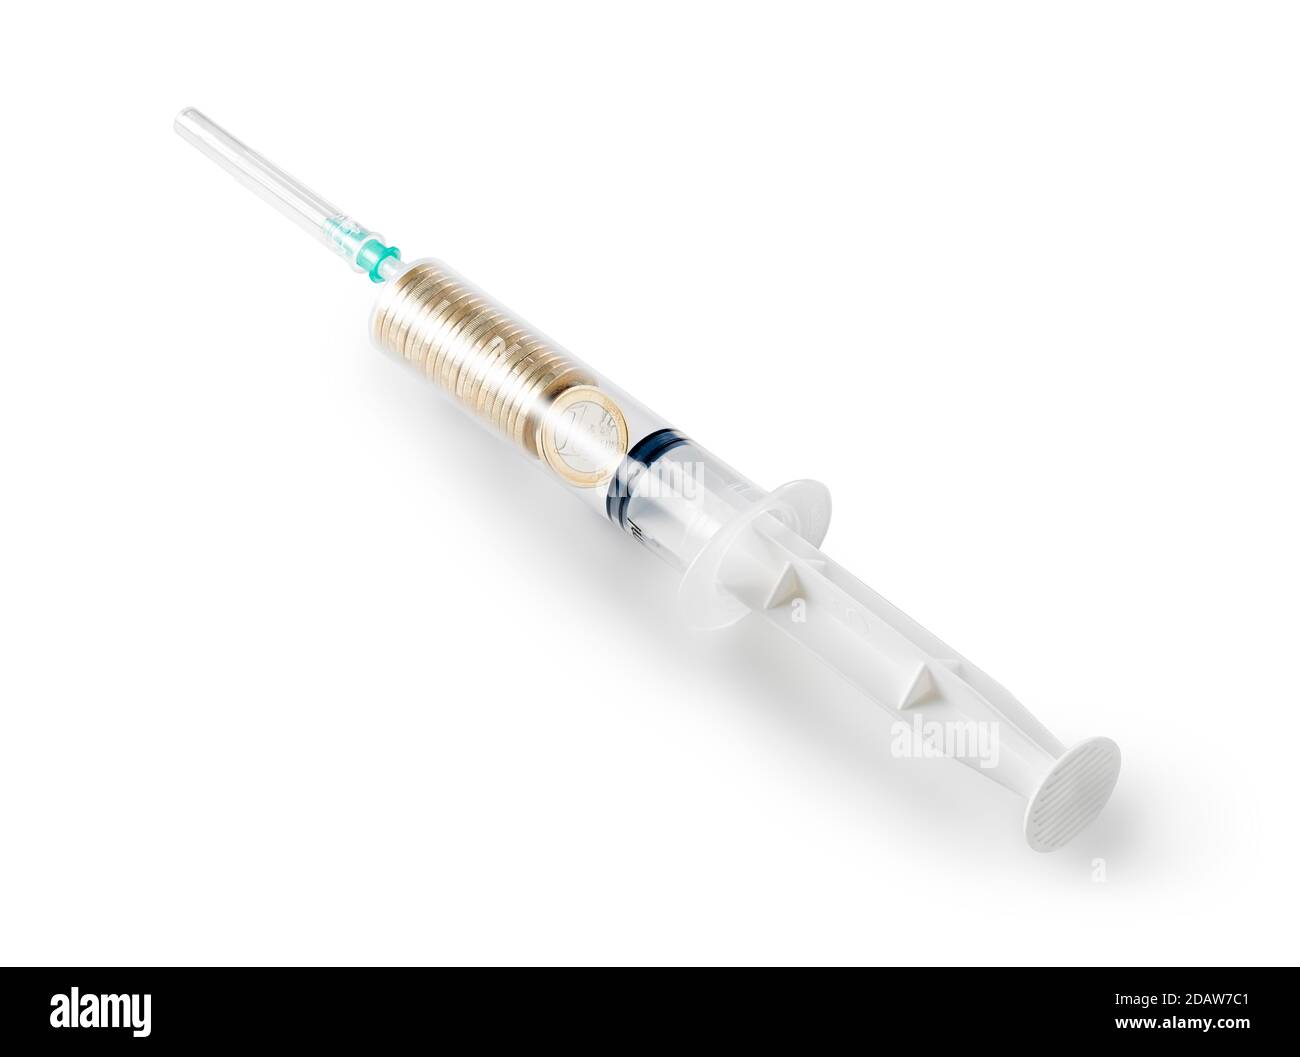 A syringe contains coins, on a white background, with shadows. Stock Photo